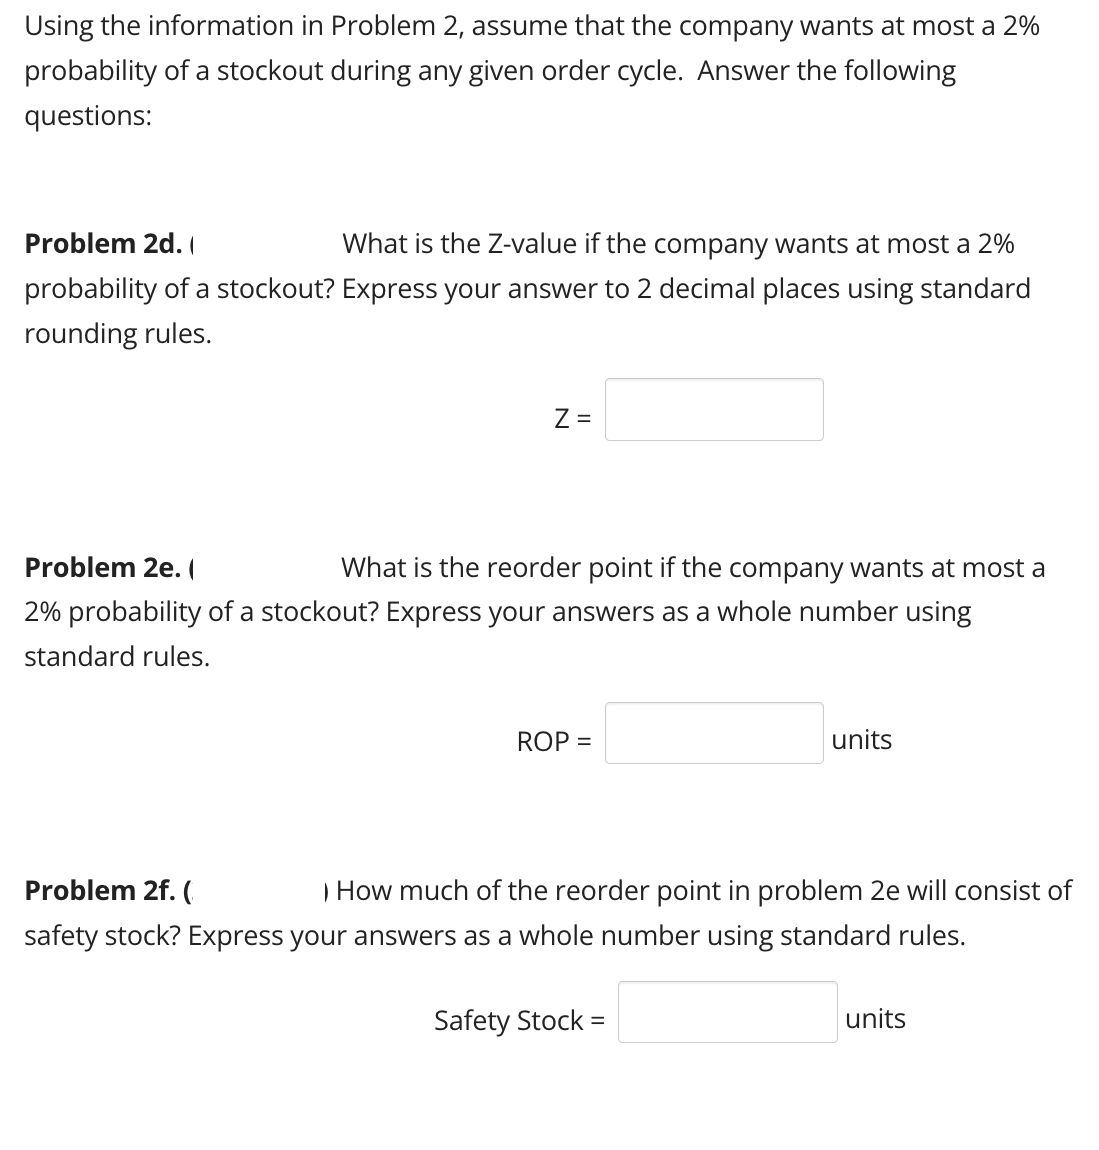 Using the information in Problem 2, assume that the company wants at most a 2%
probability of a stockout during any given order cycle. Answer the following
questions:
Problem 2d. (
What is the Z-value if the company wants at most a 2%
probability of a stockout? Express your answer to 2 decimal places using standard
rounding rules.
Z =
Problem 2e. (
What is the reorder point if the company wants at most a
2% probability of a stockout? Express your answers as a whole number using
standard rules.
Problem 2f. (
ROP =
units
) How much of the reorder point in problem 2e will consist of
safety stock? Express your answers as a whole number using standard rules.
Safety Stock =
units